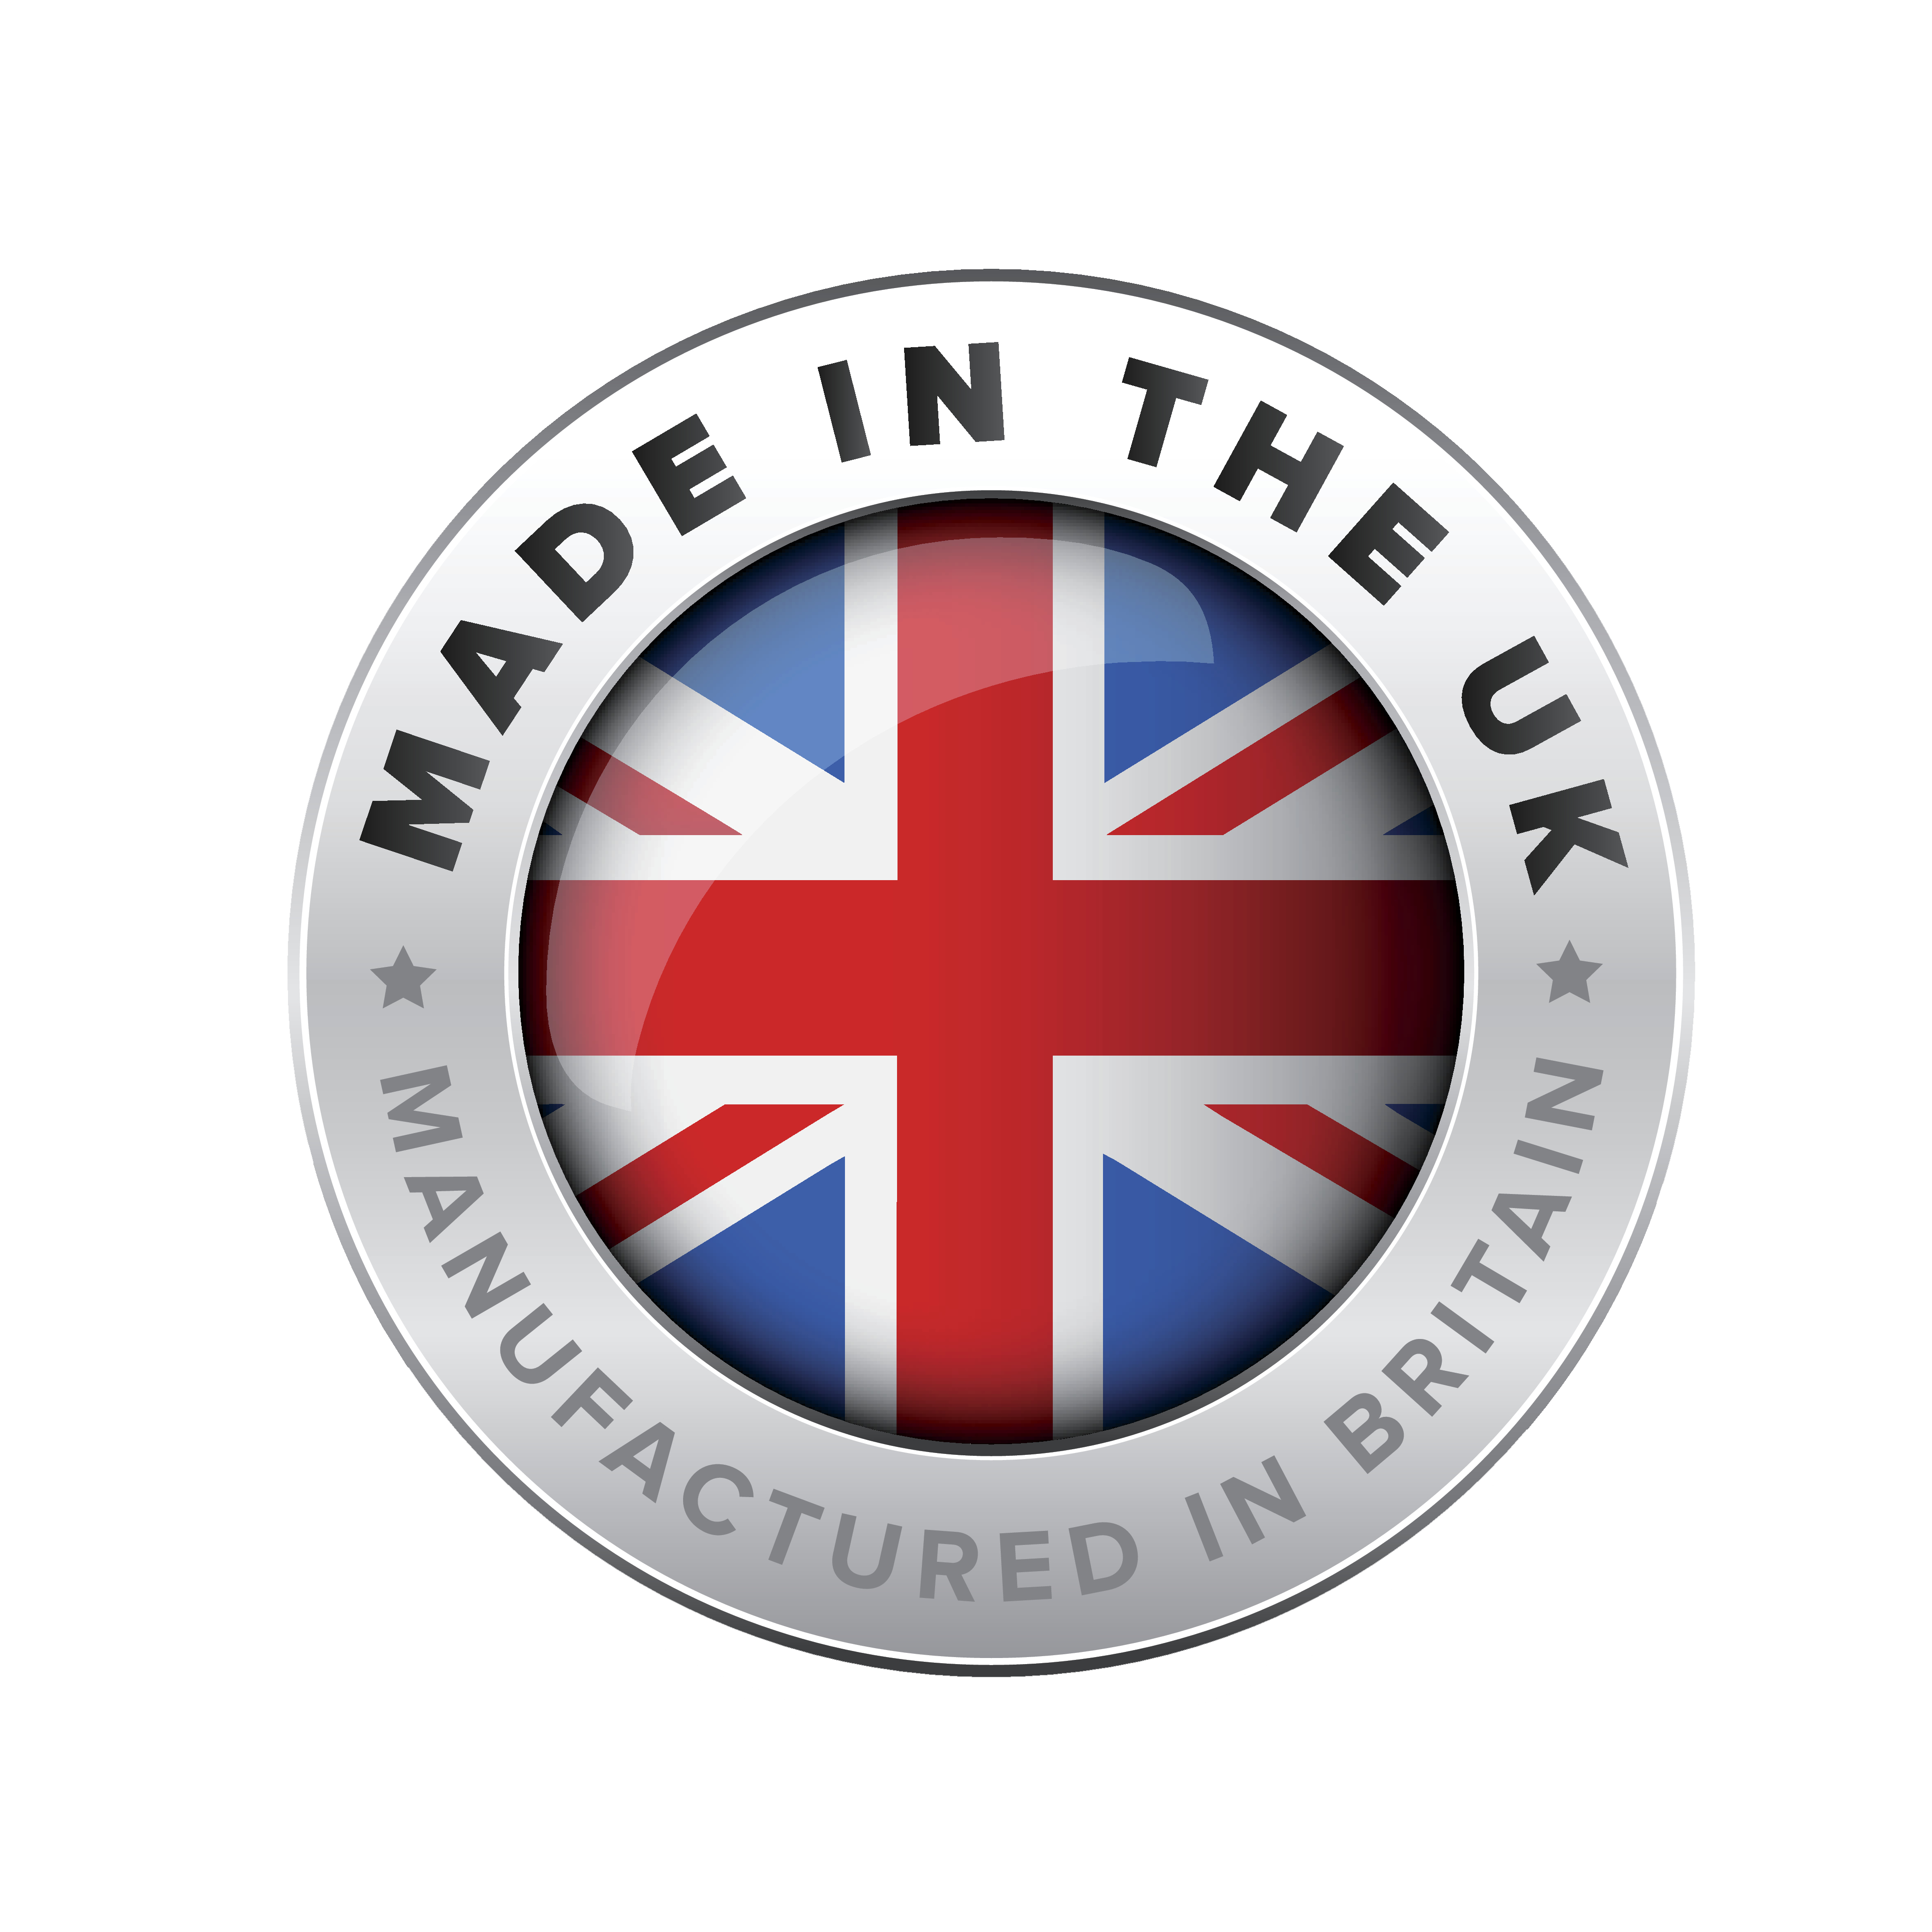 LifeVac is made in the UK, manufactured in Britain